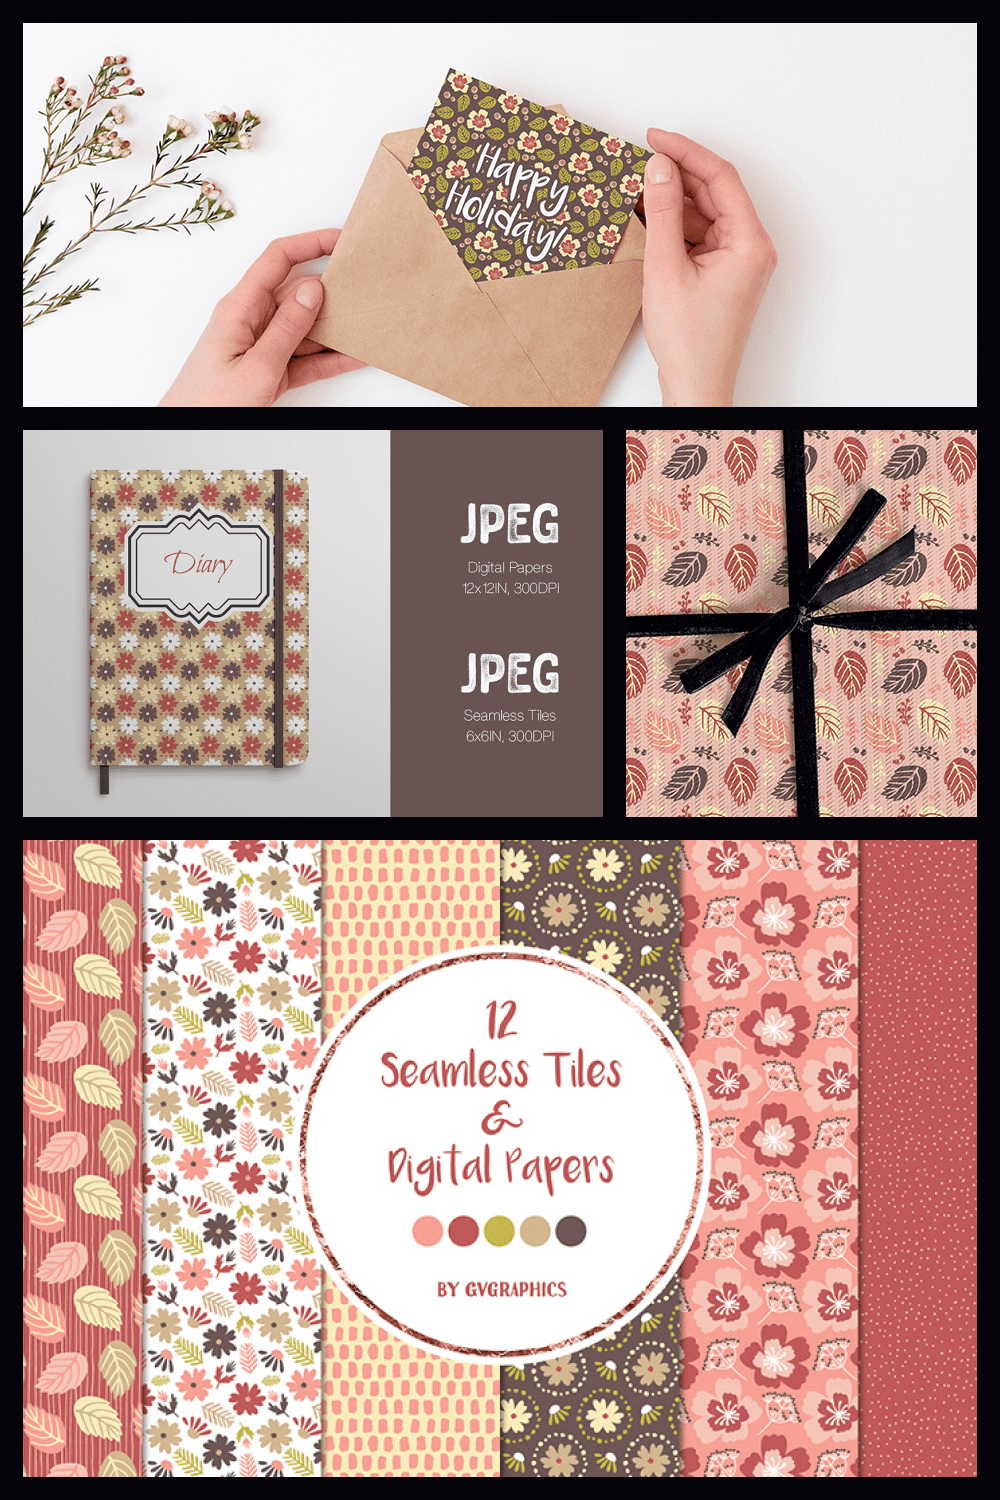 97 Flowers Leaves and Spots Seamless Tiles and Digital Papers